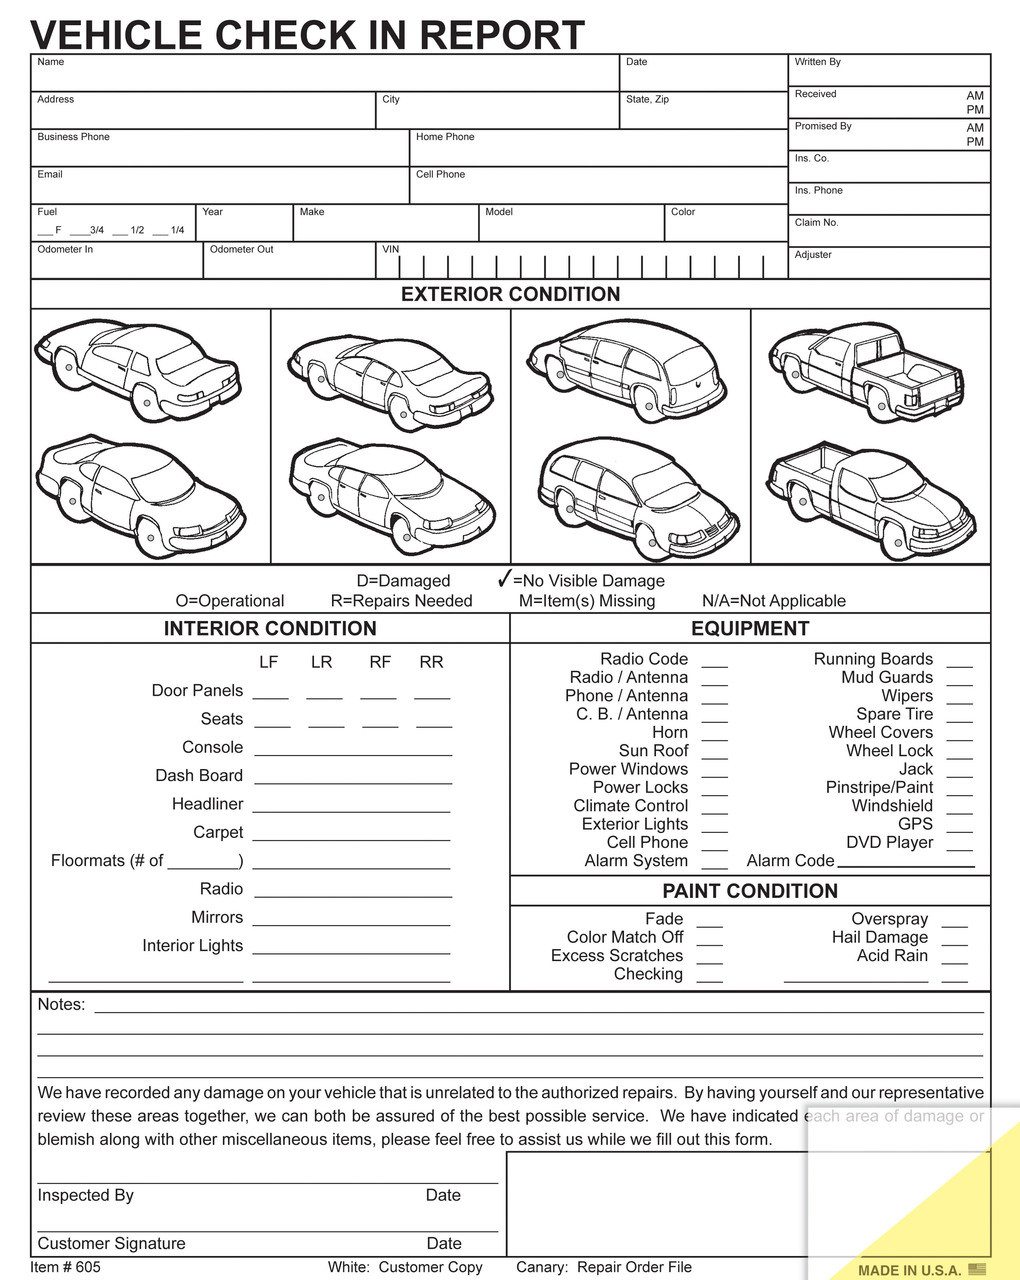 2 Part Vehicle Check in Report Form 45